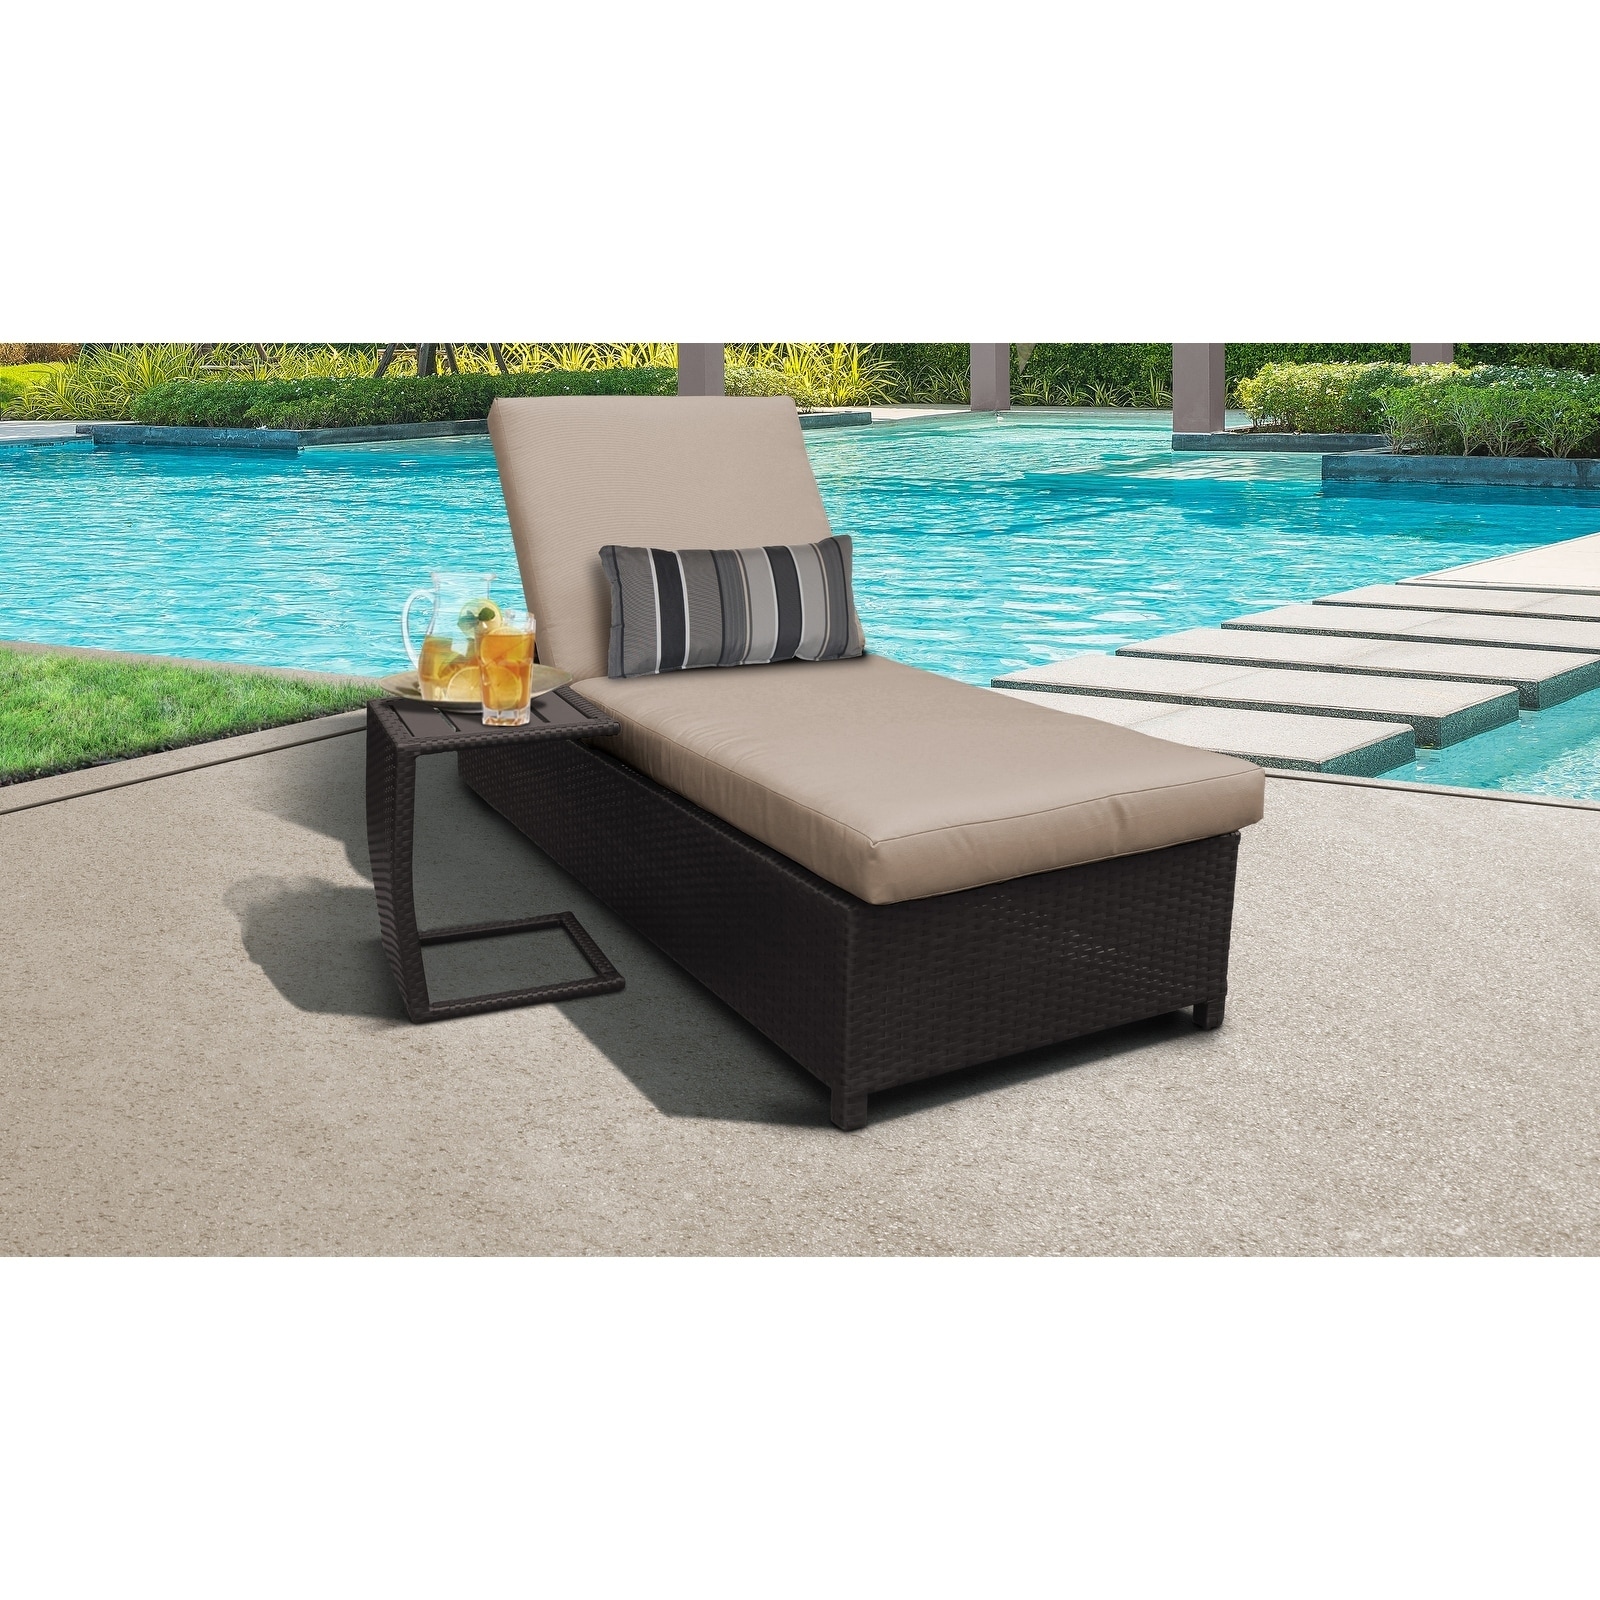 Belle Wheeled Chaise Outdoor Wicker Patio Furniture And Side Table